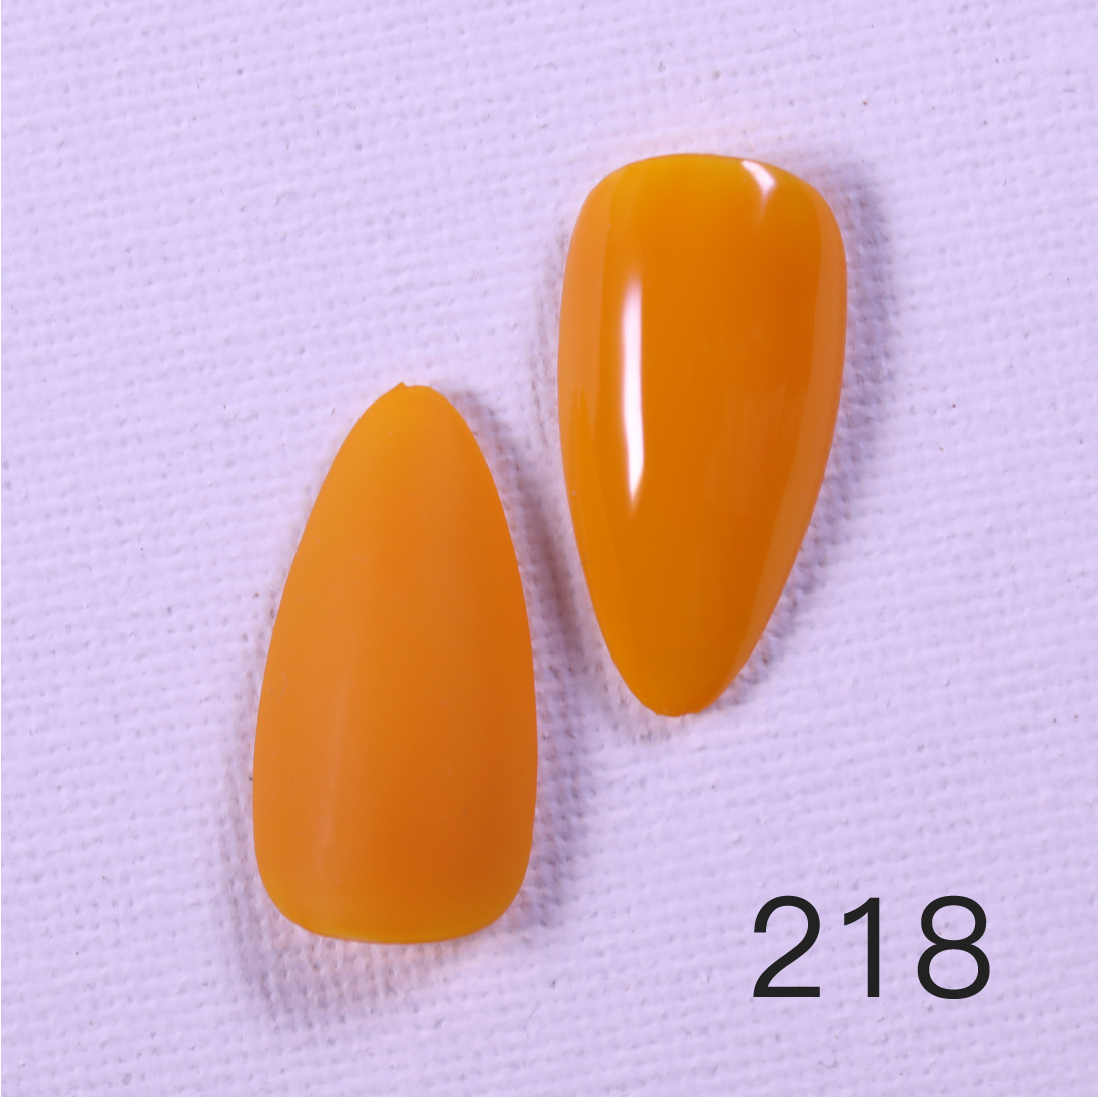 {{ GelPolish_USA }} GelPolish USA 218 GelPolish USA Mela Mela Gel Polish Colour - 80 colors available to choose from - {{ UV_Drying_machine}} - {{ Powerful_LED_Nail_Dryer}} {{ Gelish }} {{Gel_nail_polish}} {{ Gel_polish }}